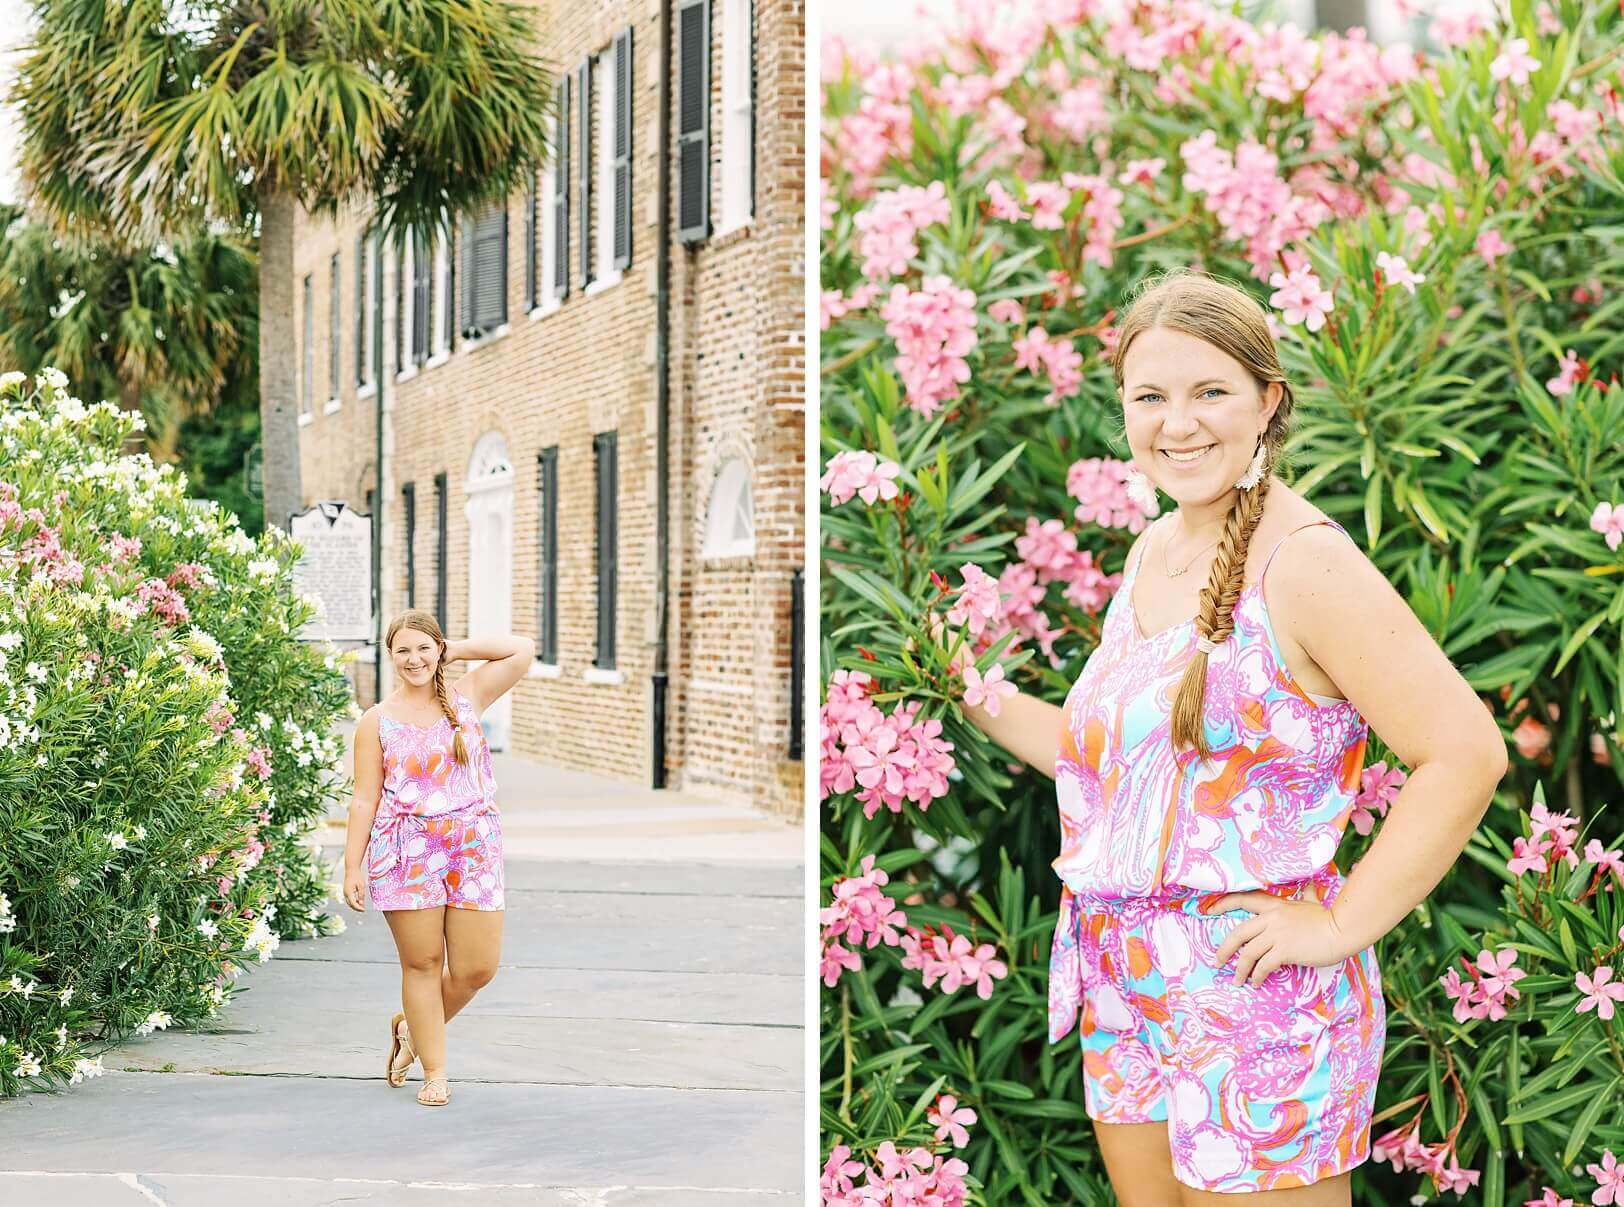 Charleston Battery with colorful pink flowers in summer | Kaitlin Scott Photography